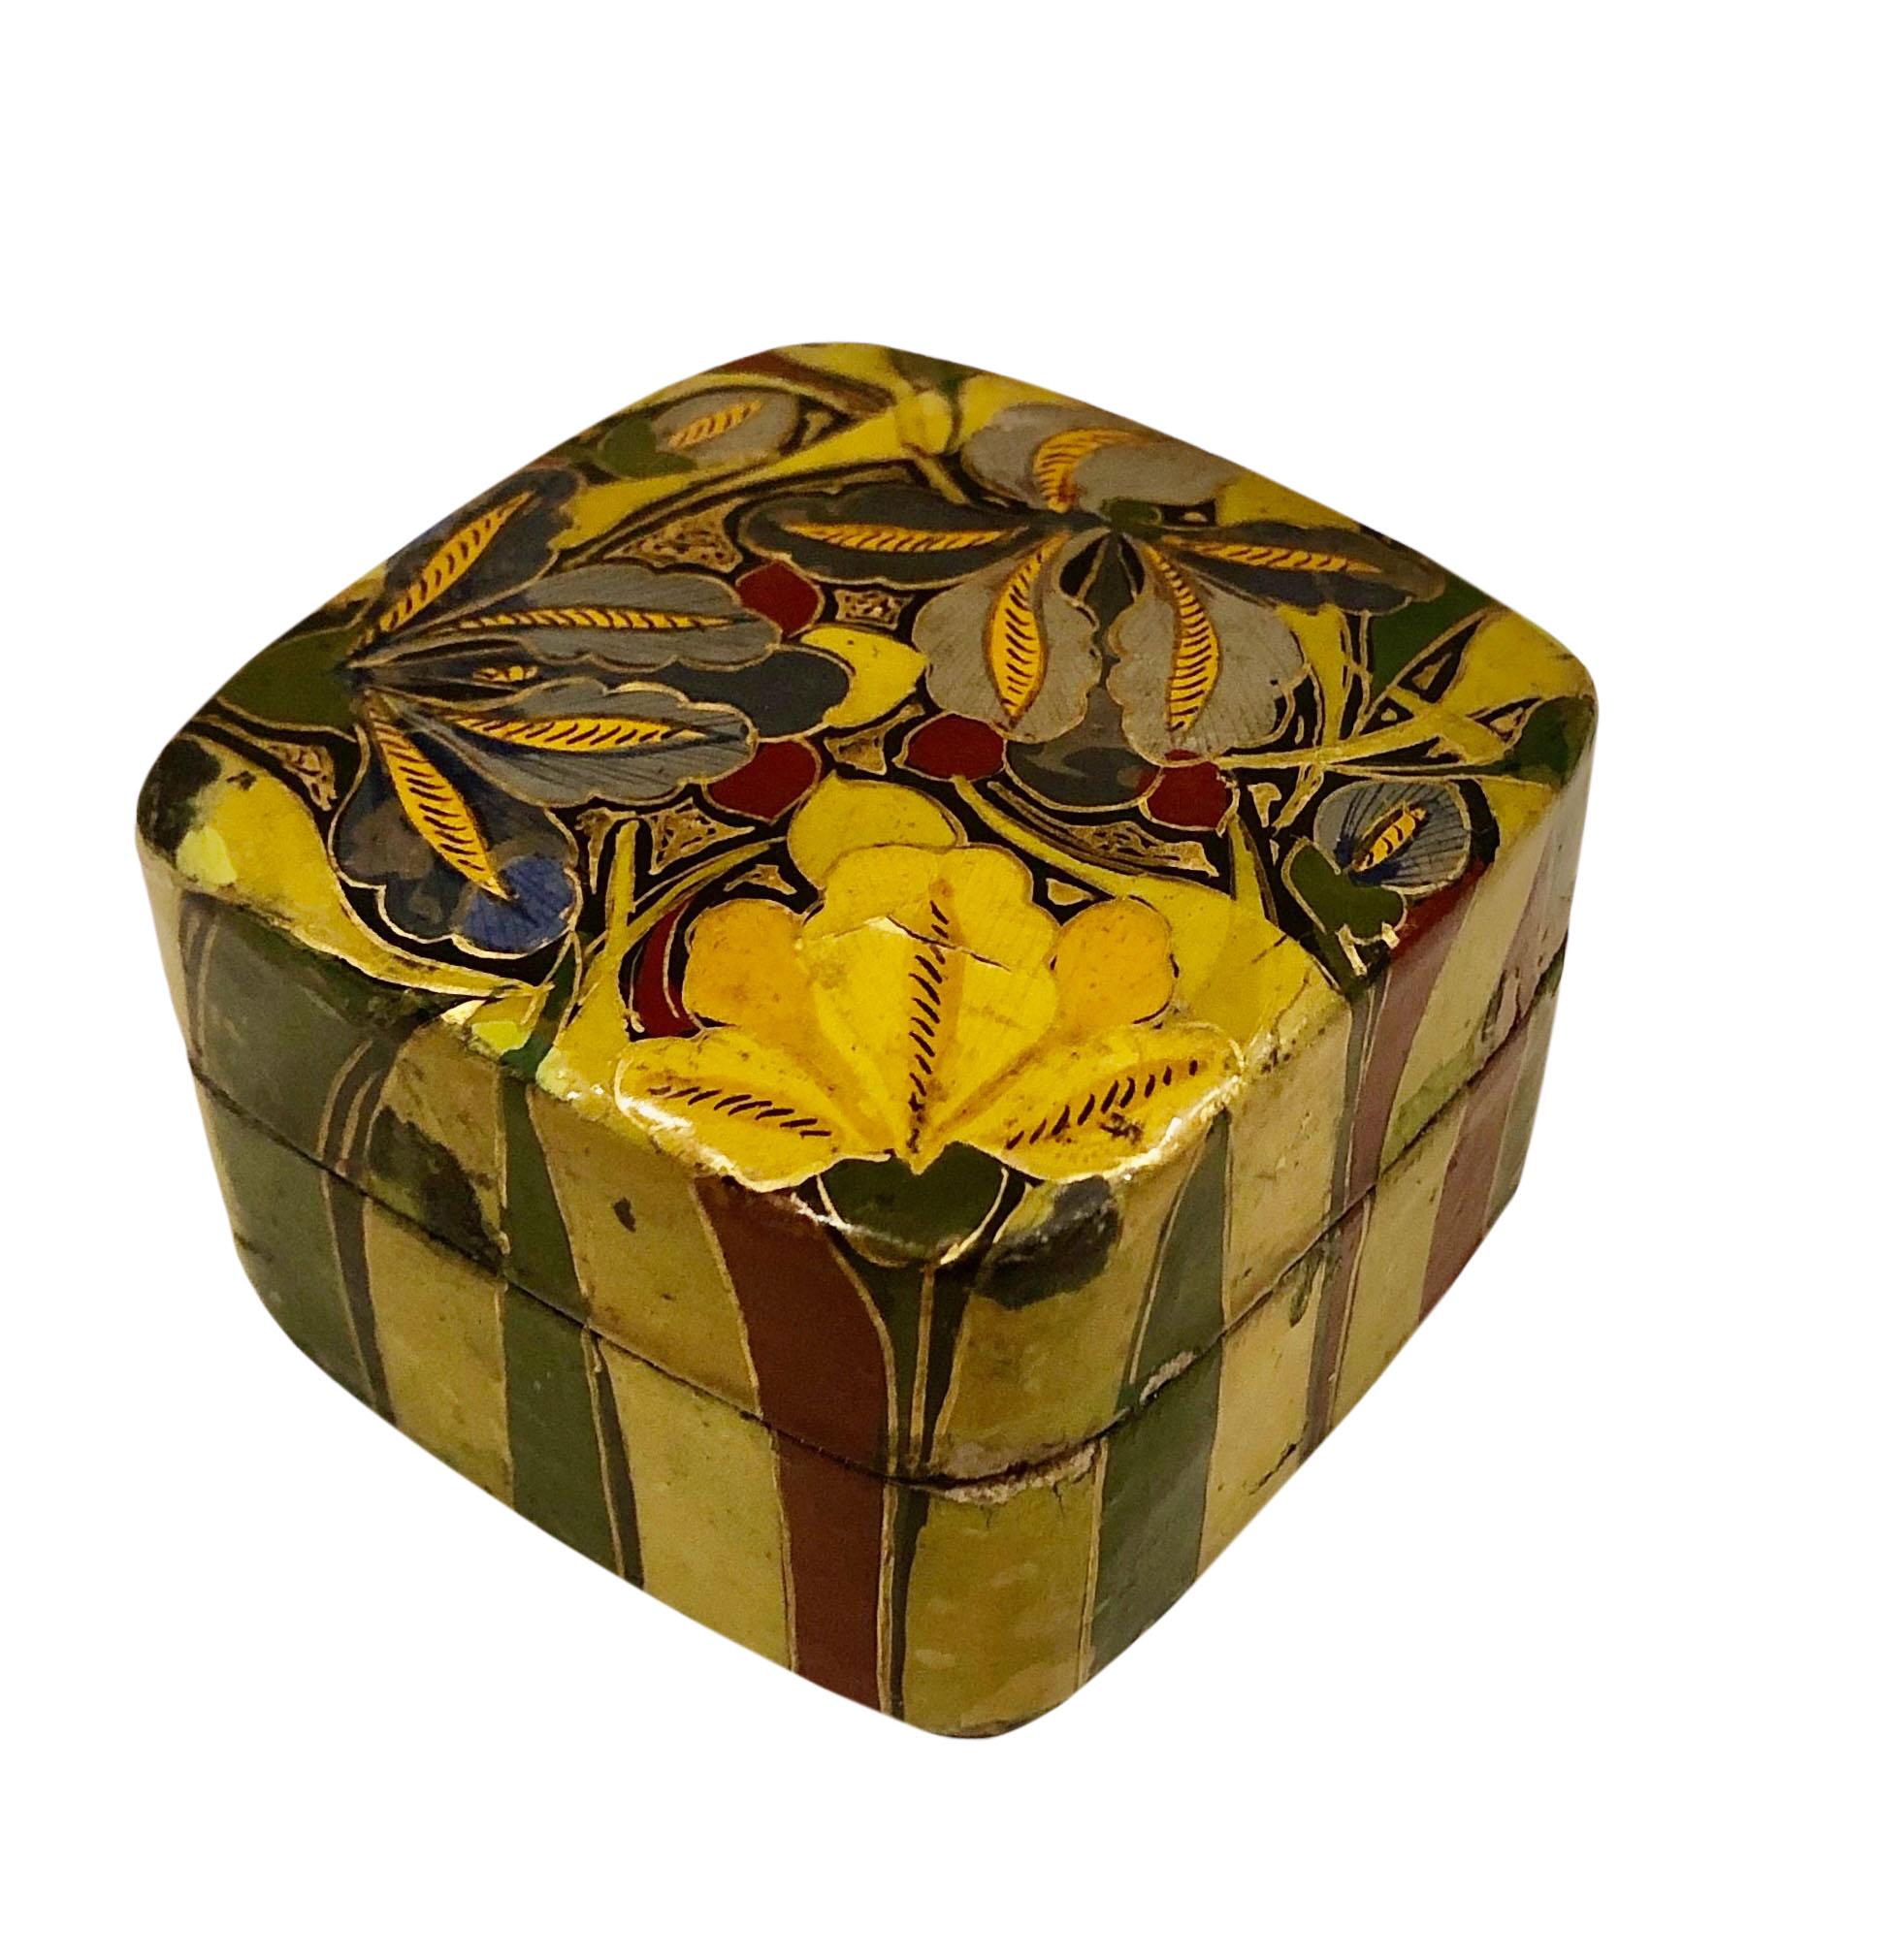 A hand painted papier mâché square box with stripes on the sides and flowers on the top. It is signed Kashmir. Circa 1960s.